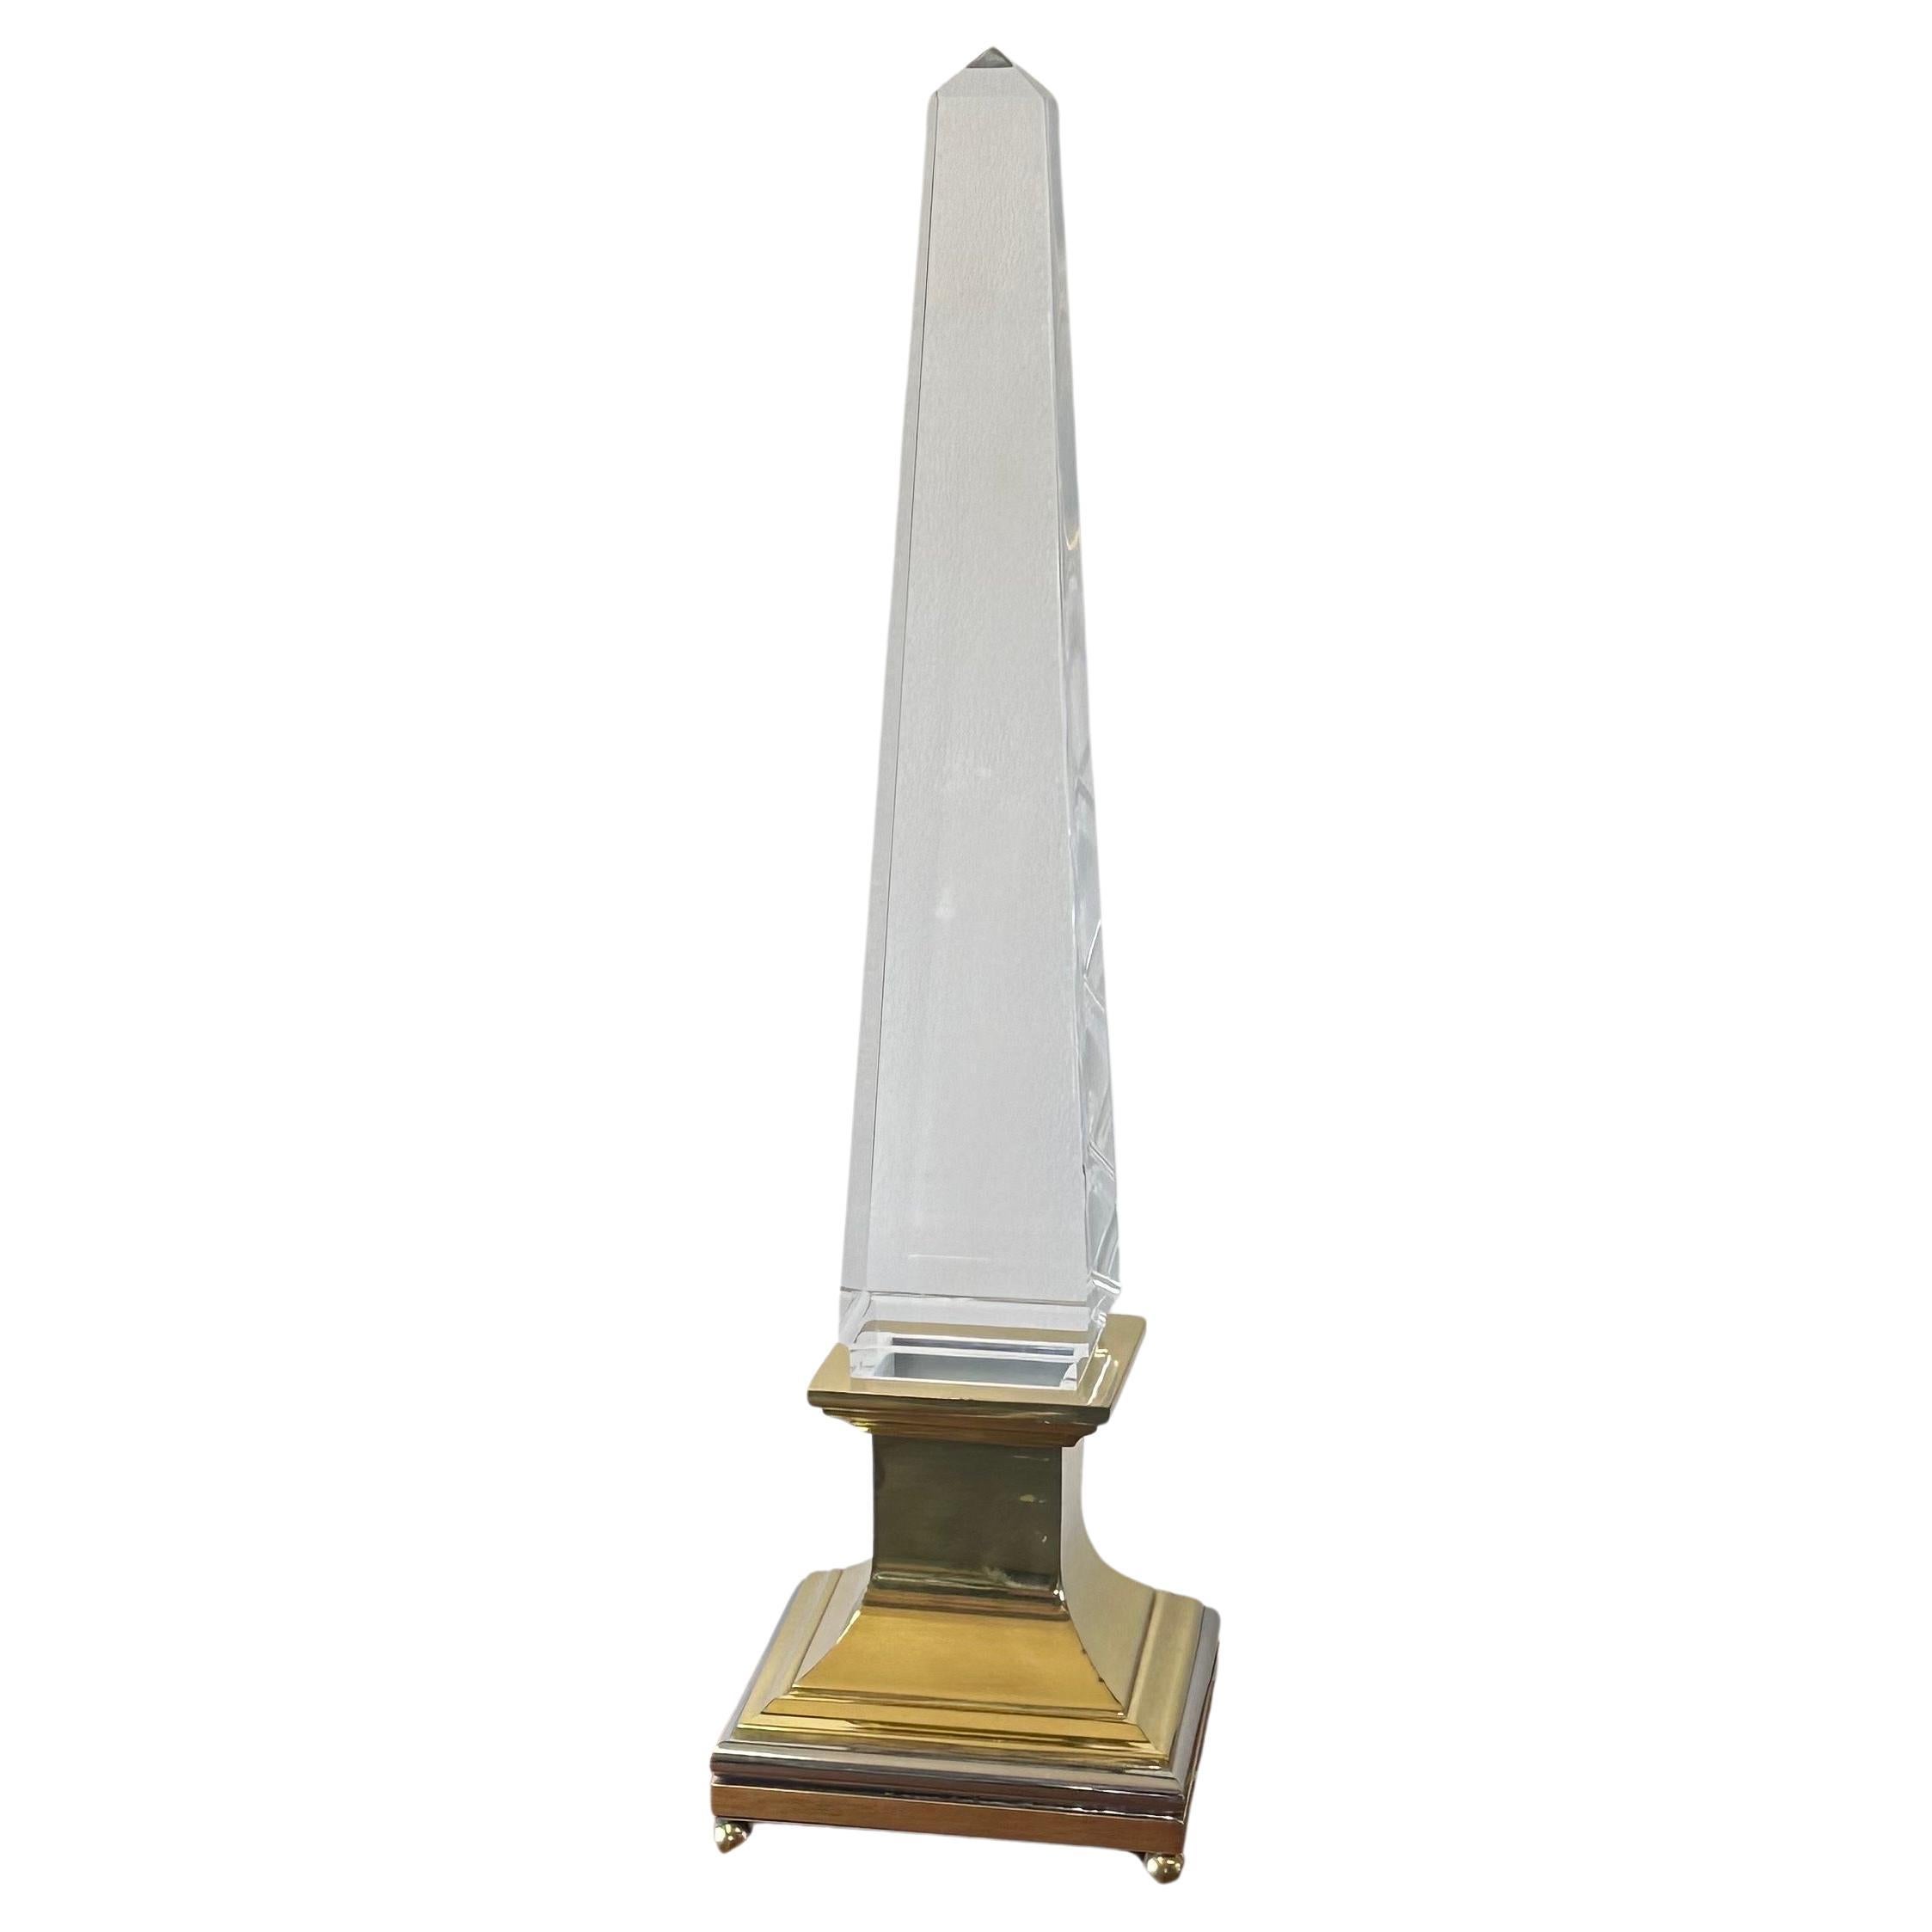 20th Century Pair of Lucite and Brass Obelisk Table Lamps by Sandro Petti for Maison Jansen For Sale